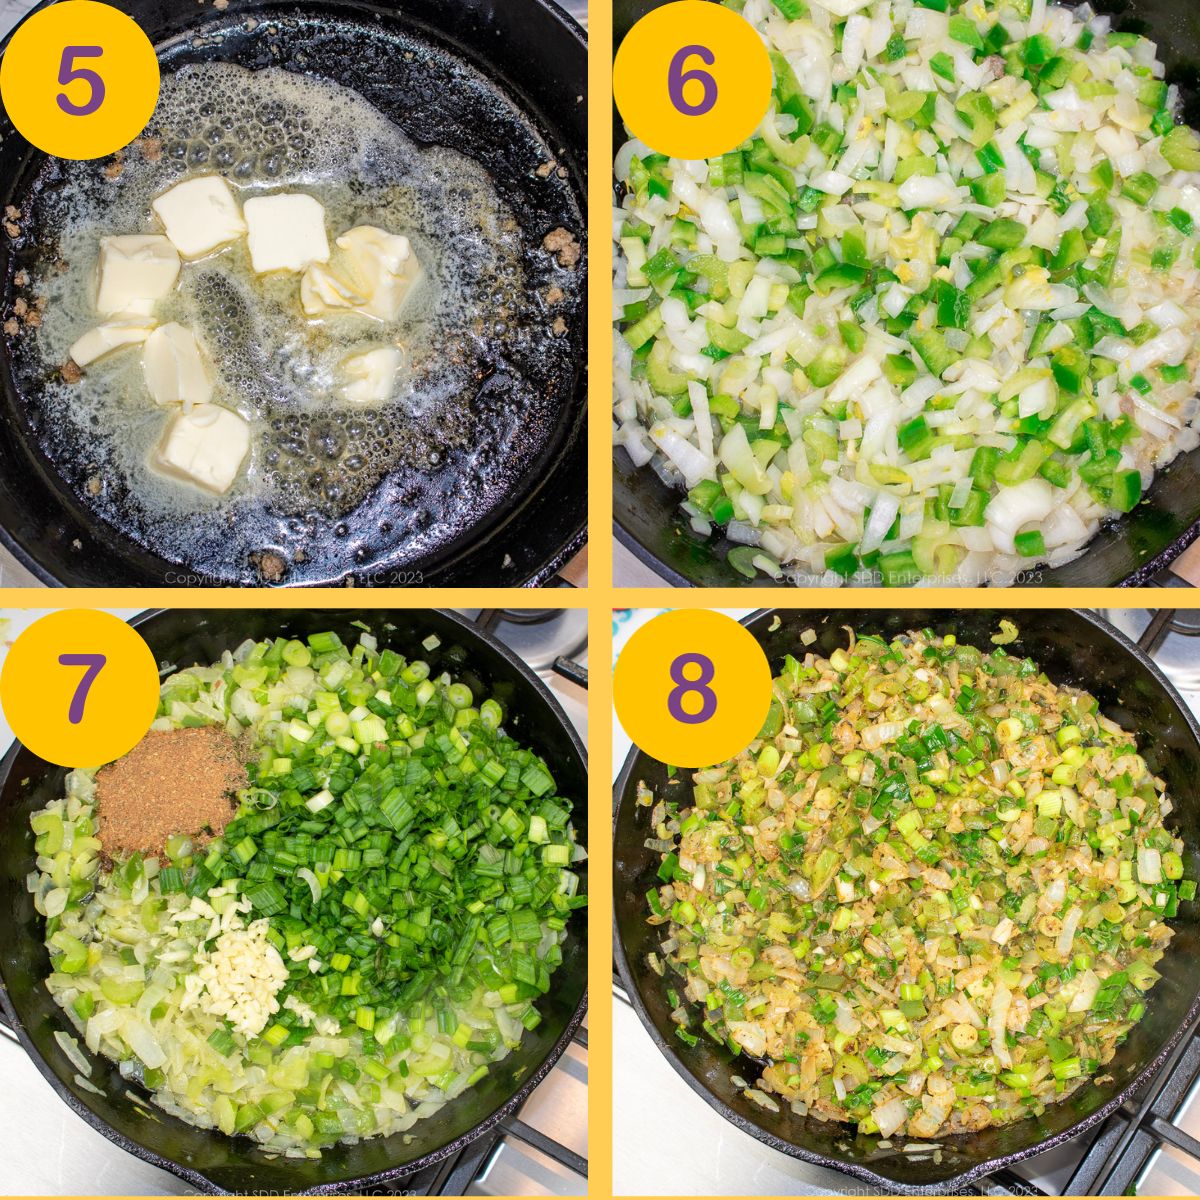 Steps to saute vegetables and seasonings in a cast iron skillet.